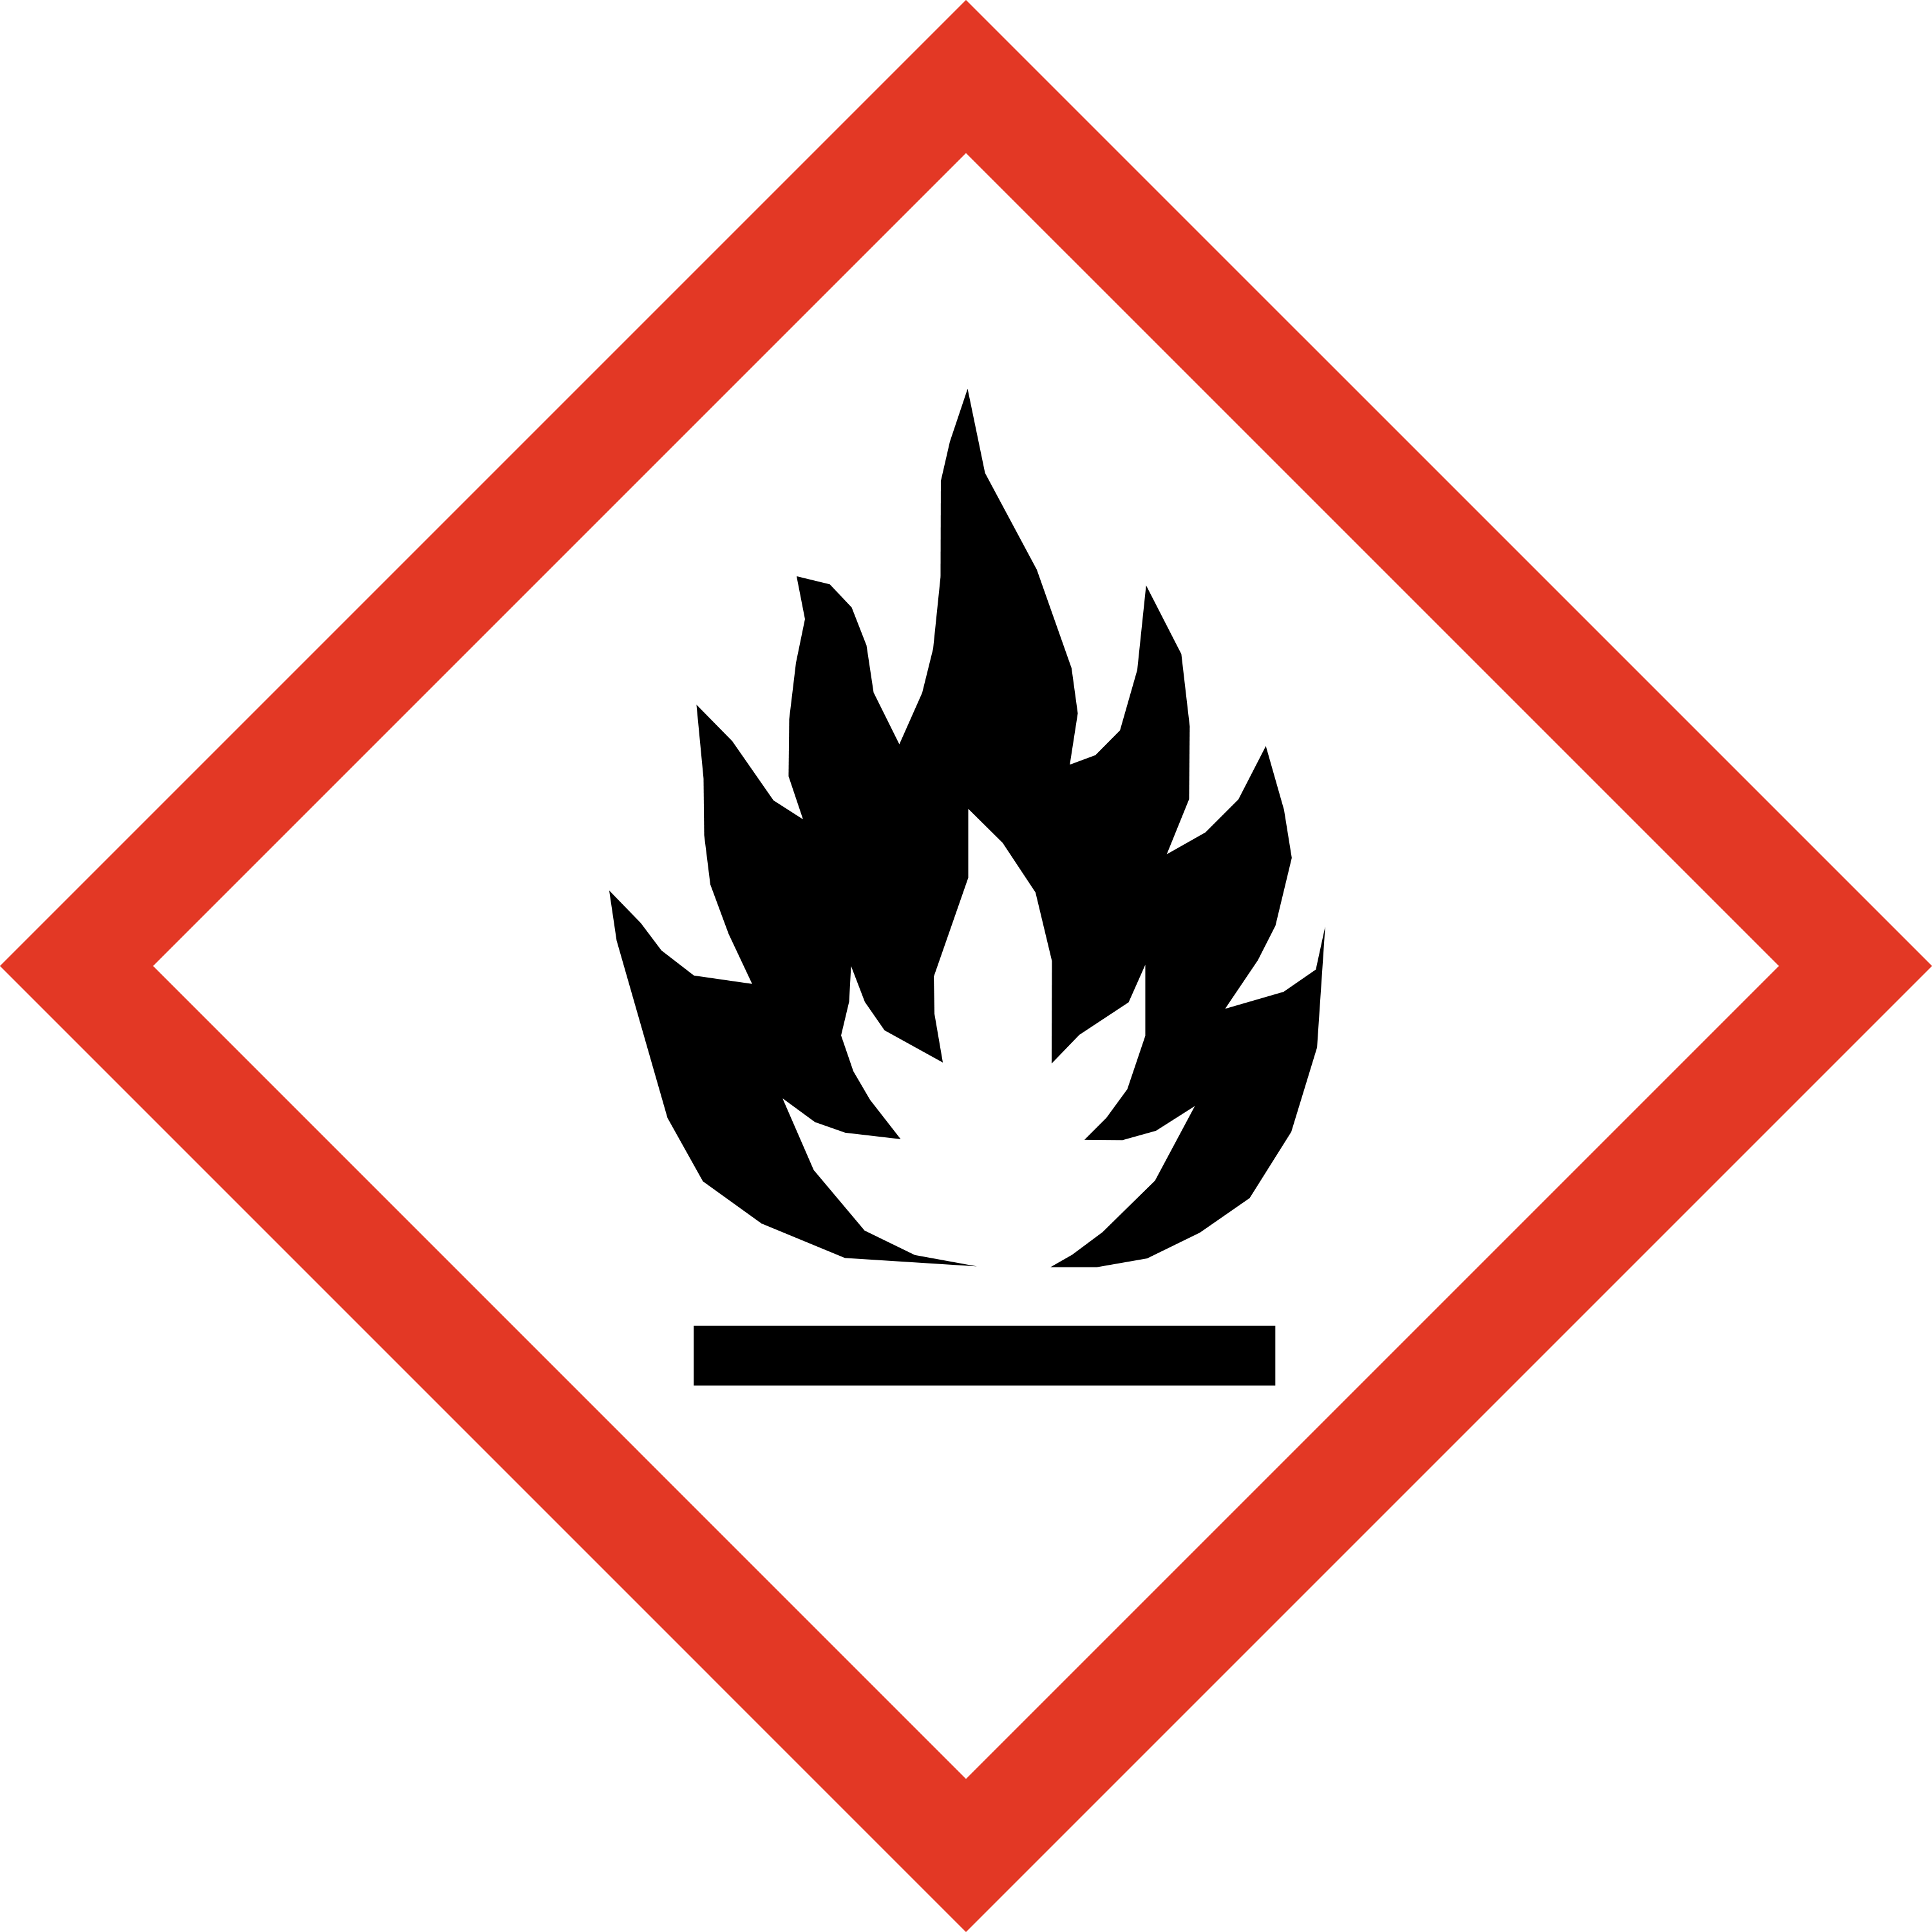 Pictogram of flammable substances